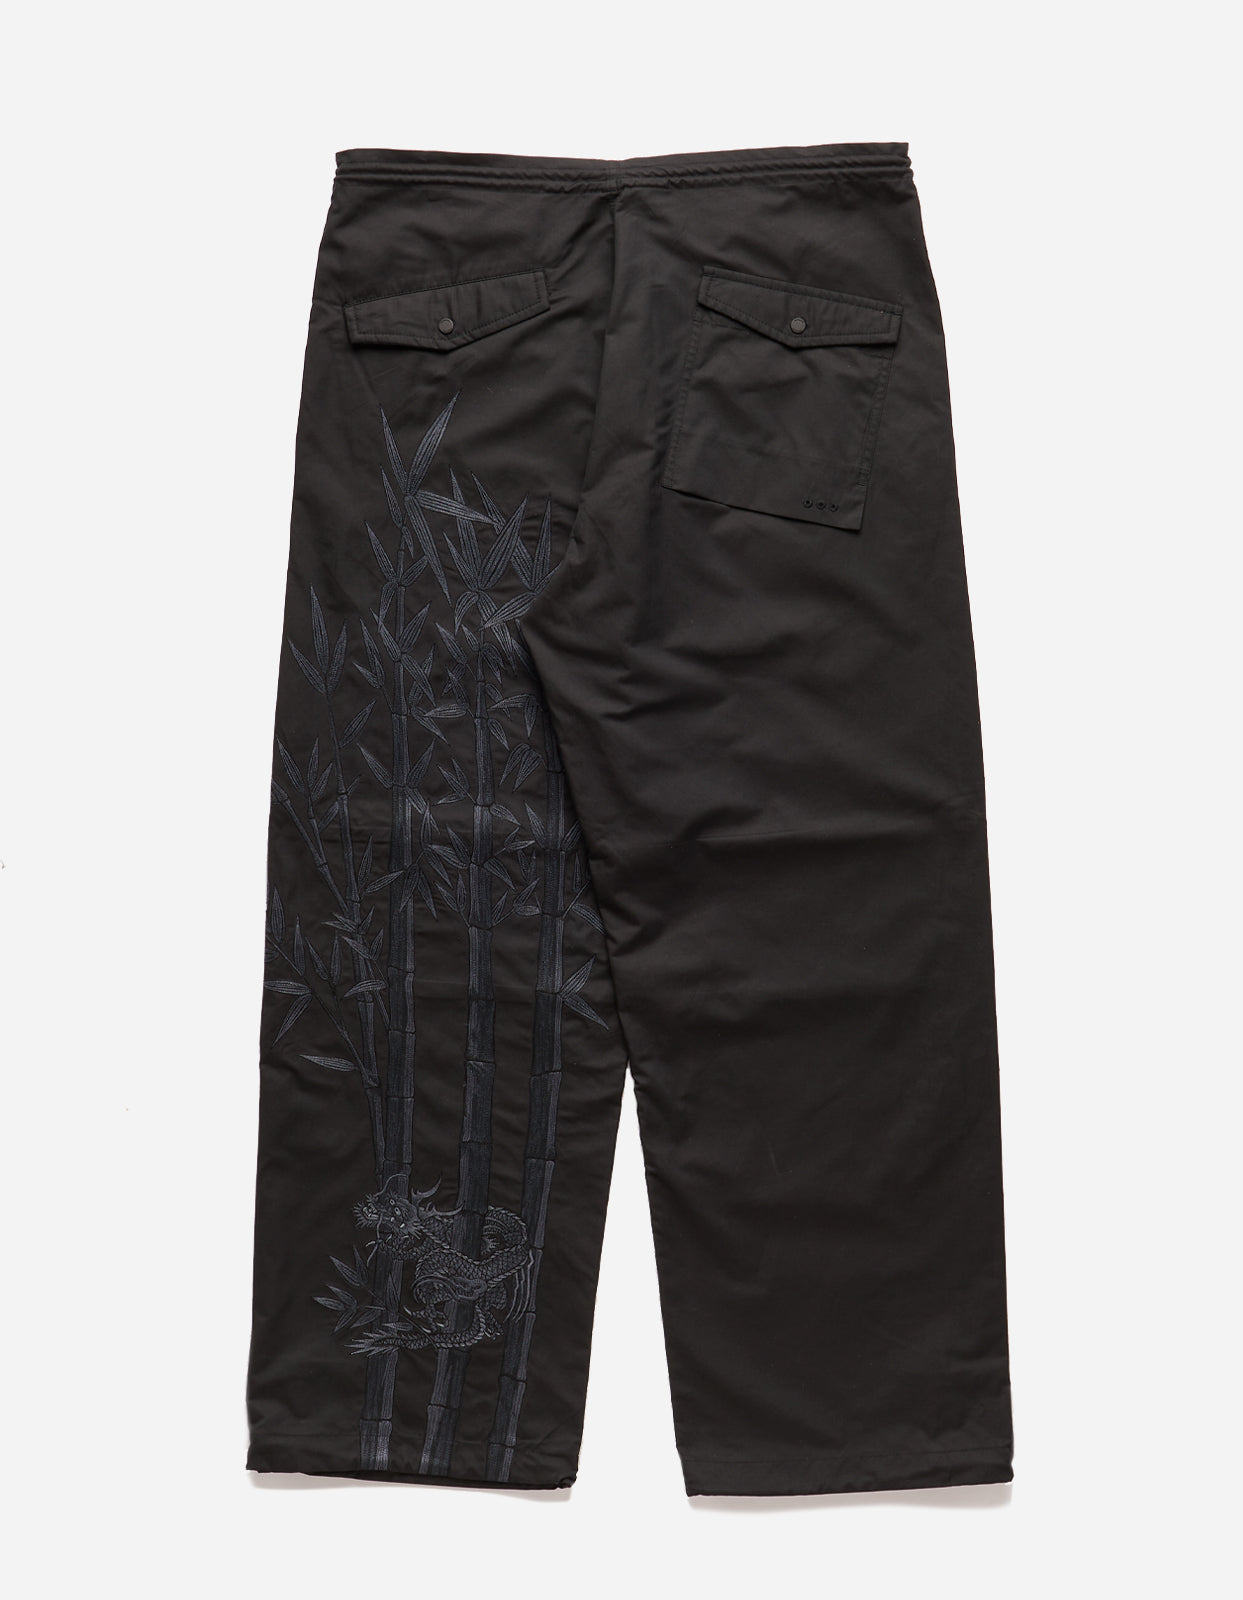 Embroidered Snopants®